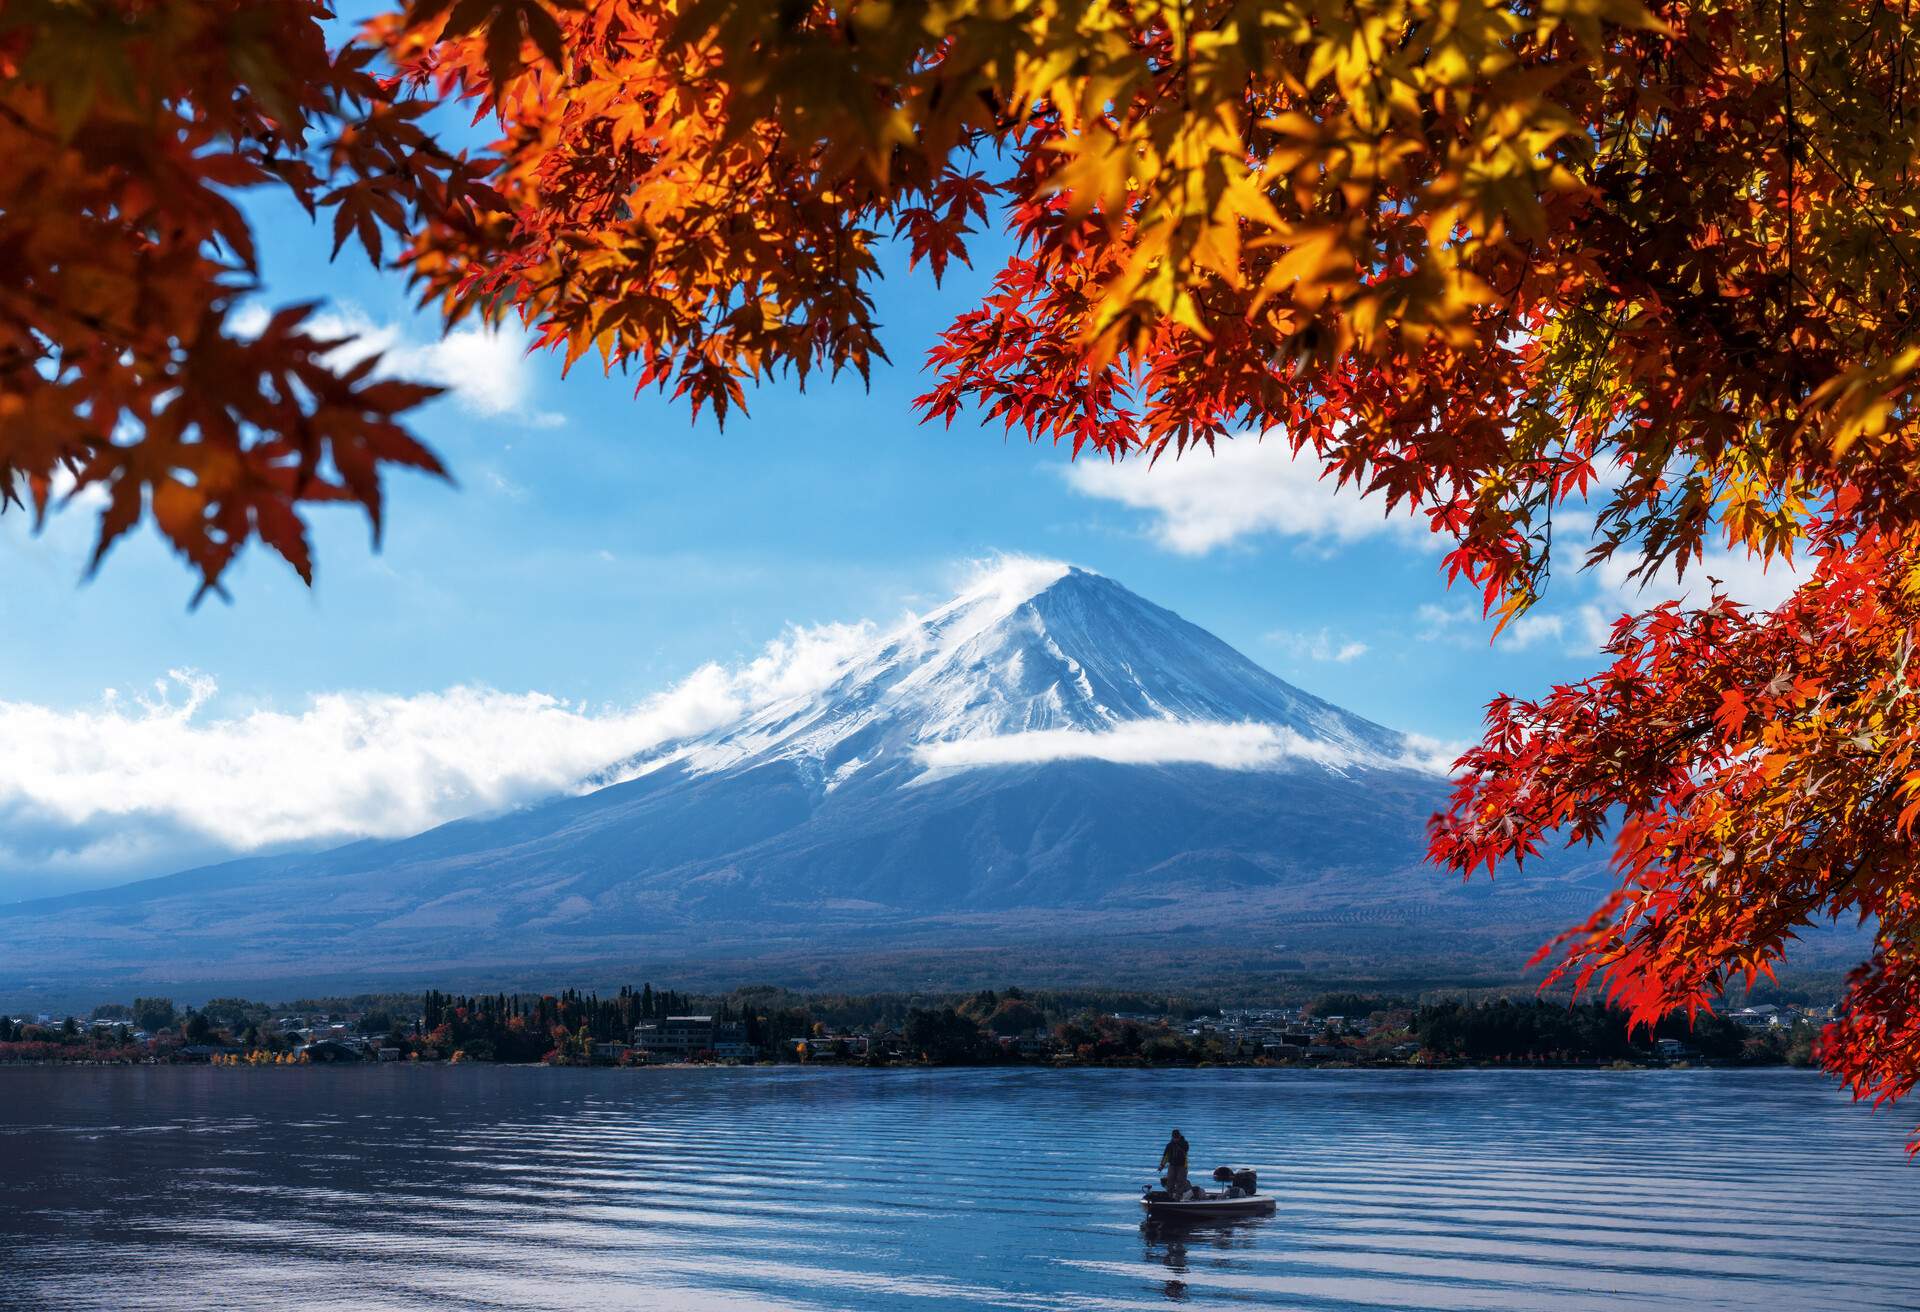 A boat on the lake overlooking the lakeside town and snow-capped Mount Fuji.